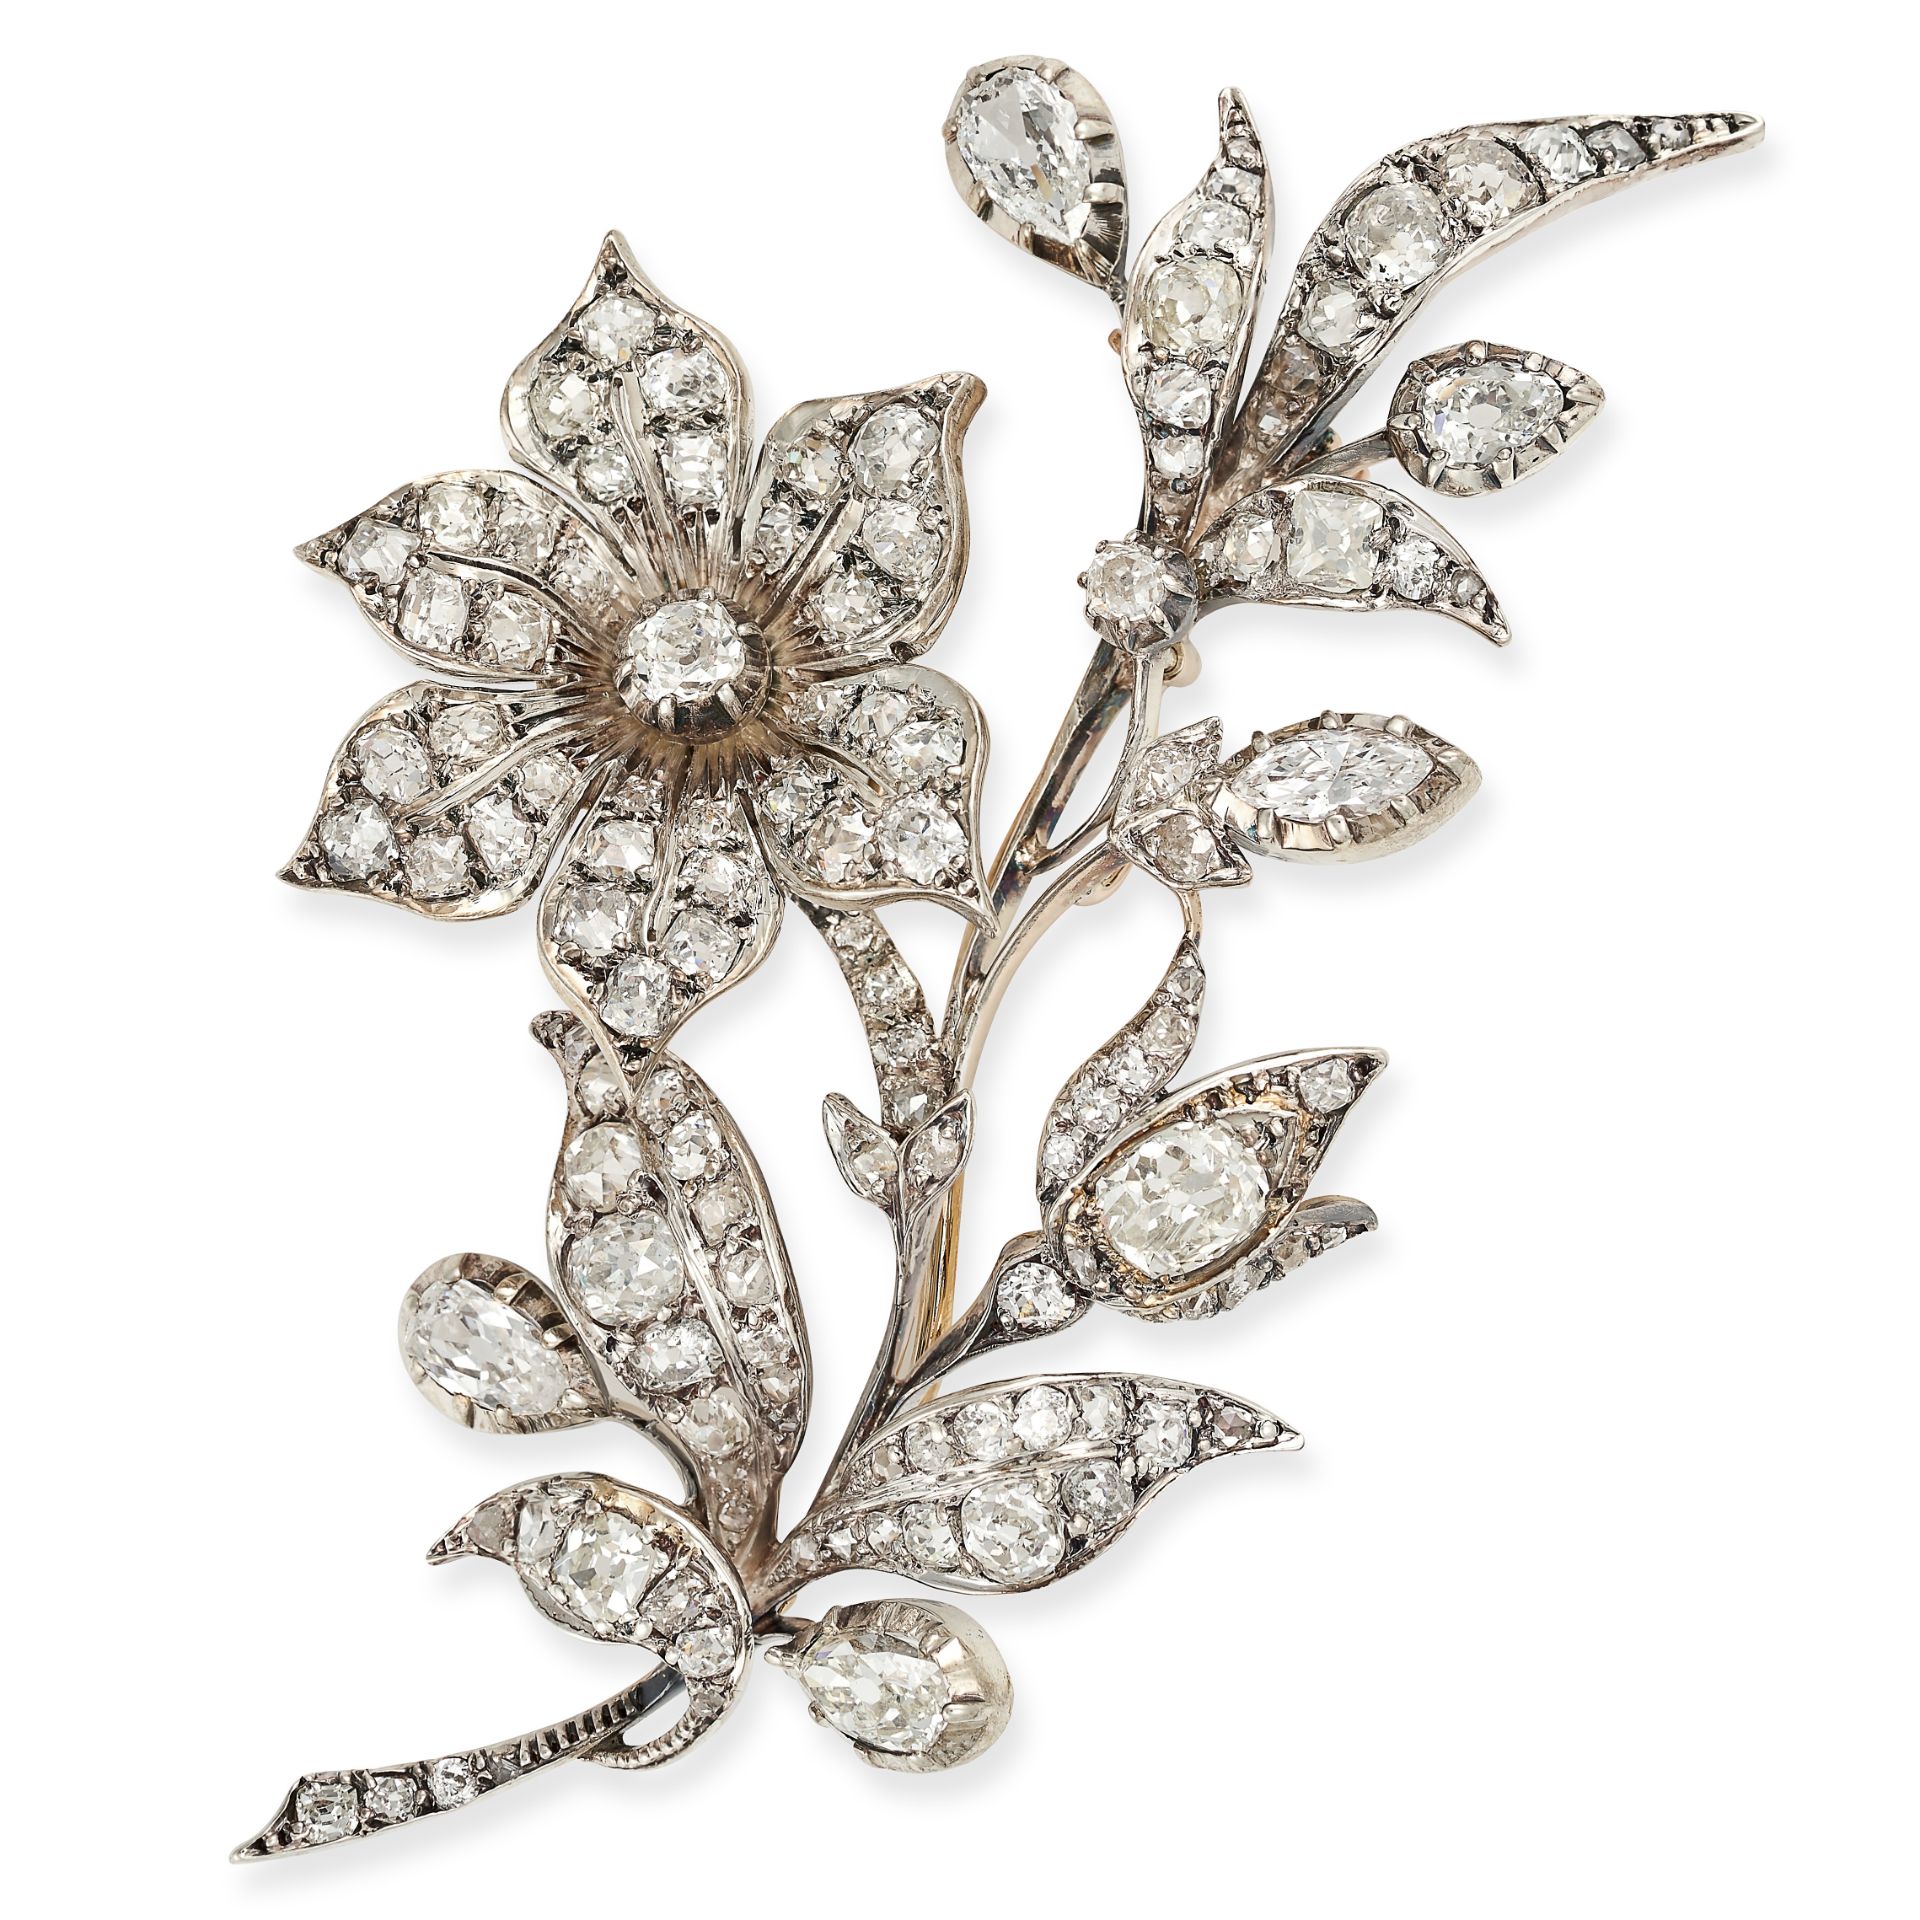 AN ANTIQUE VICTORIAN DIAMOND EN TREMBLANT BROOCH, 19TH CENTURY in silver and yellow gold, designe...